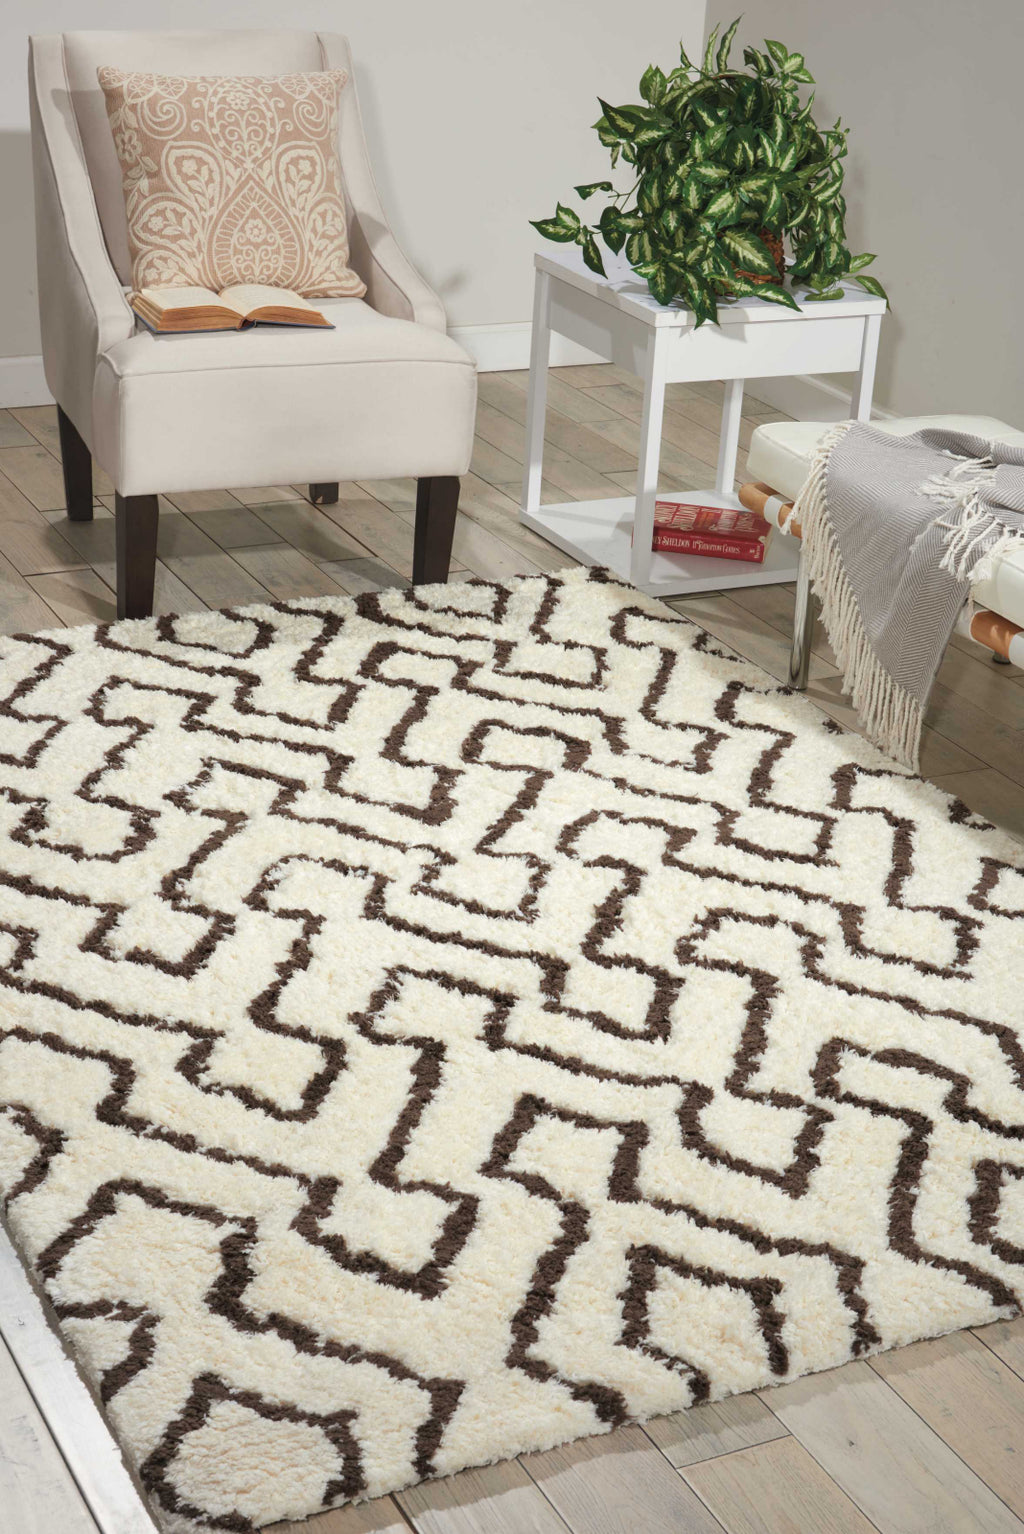 Nourison Galway GLW03 Ivory/Chocolate Area Rug Room Image Feature